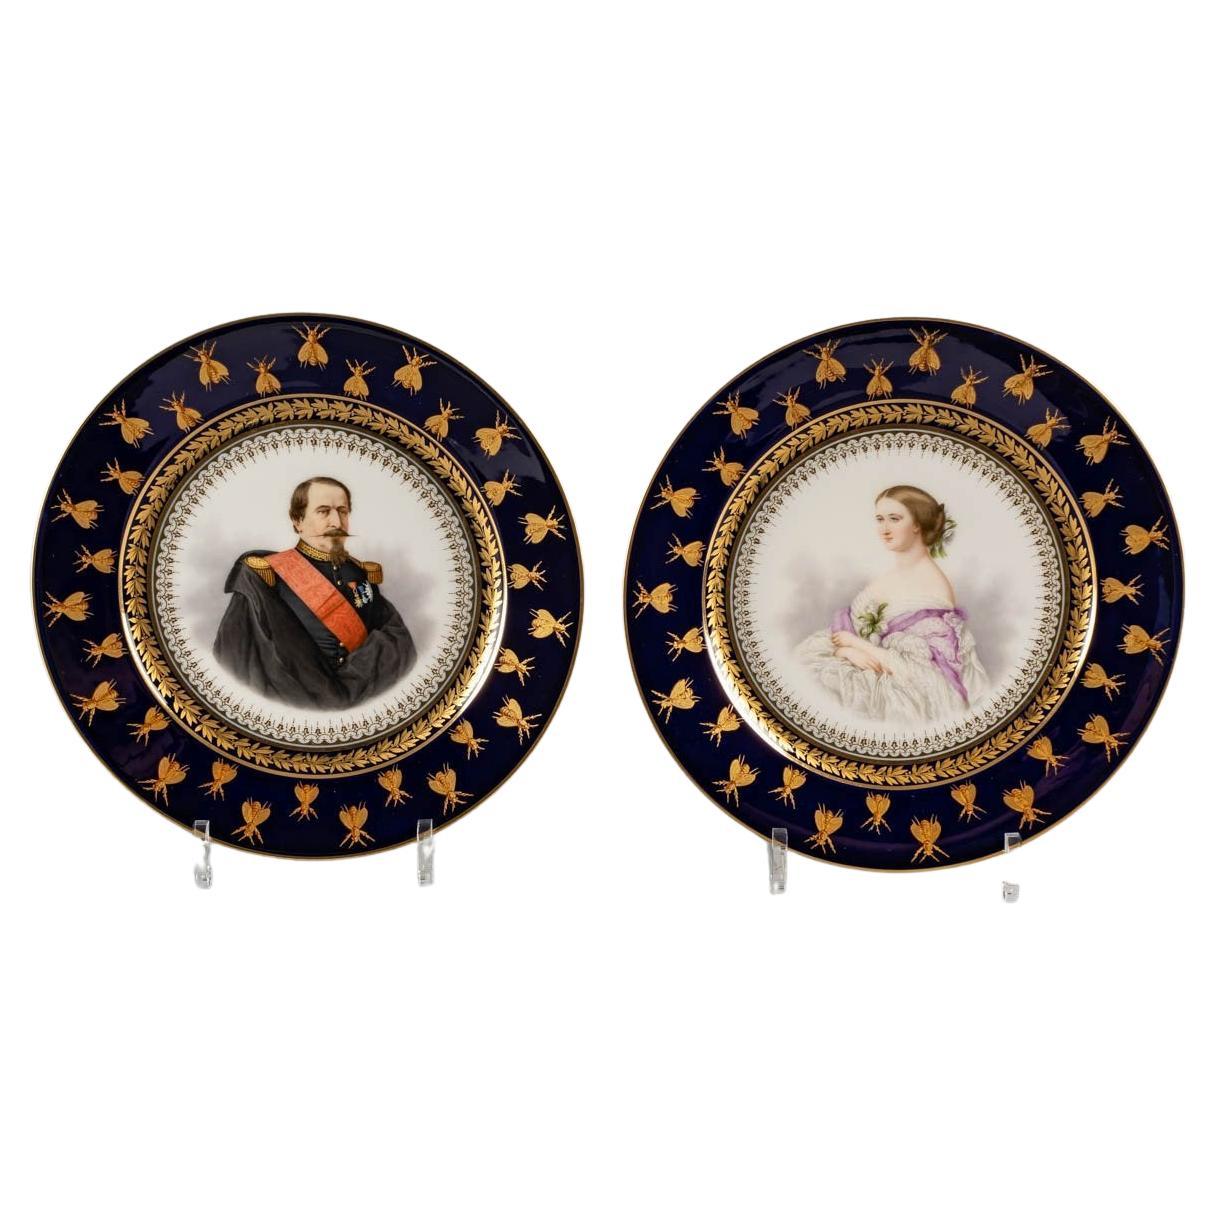 Pair of Sevres Porcelain Plates of Napoleon III and Eugenie